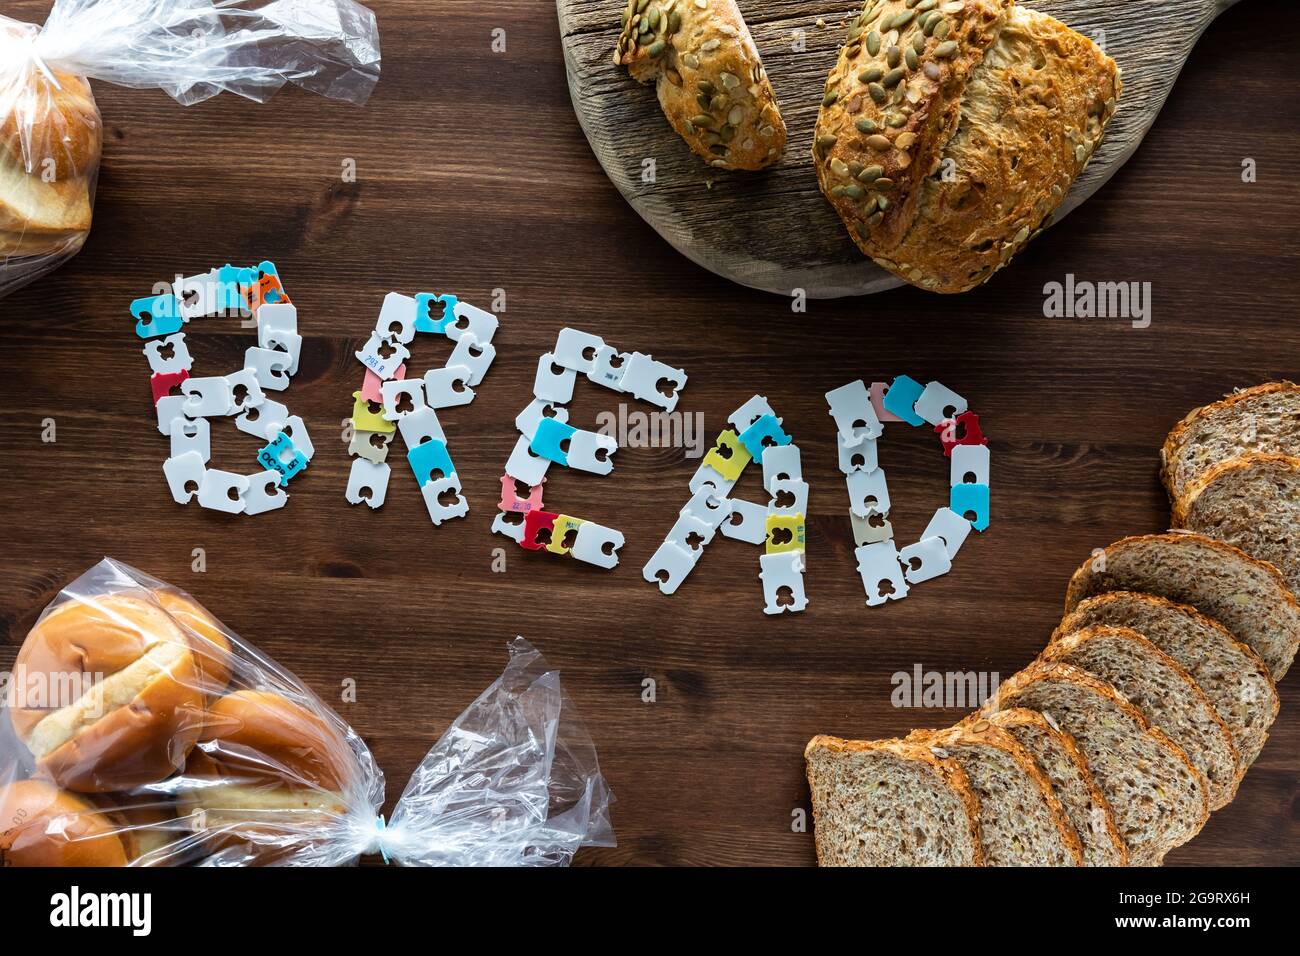 Top down view of the word bread made from the bread bag packaging clips, surrounded by various types of bread. Stock Photo